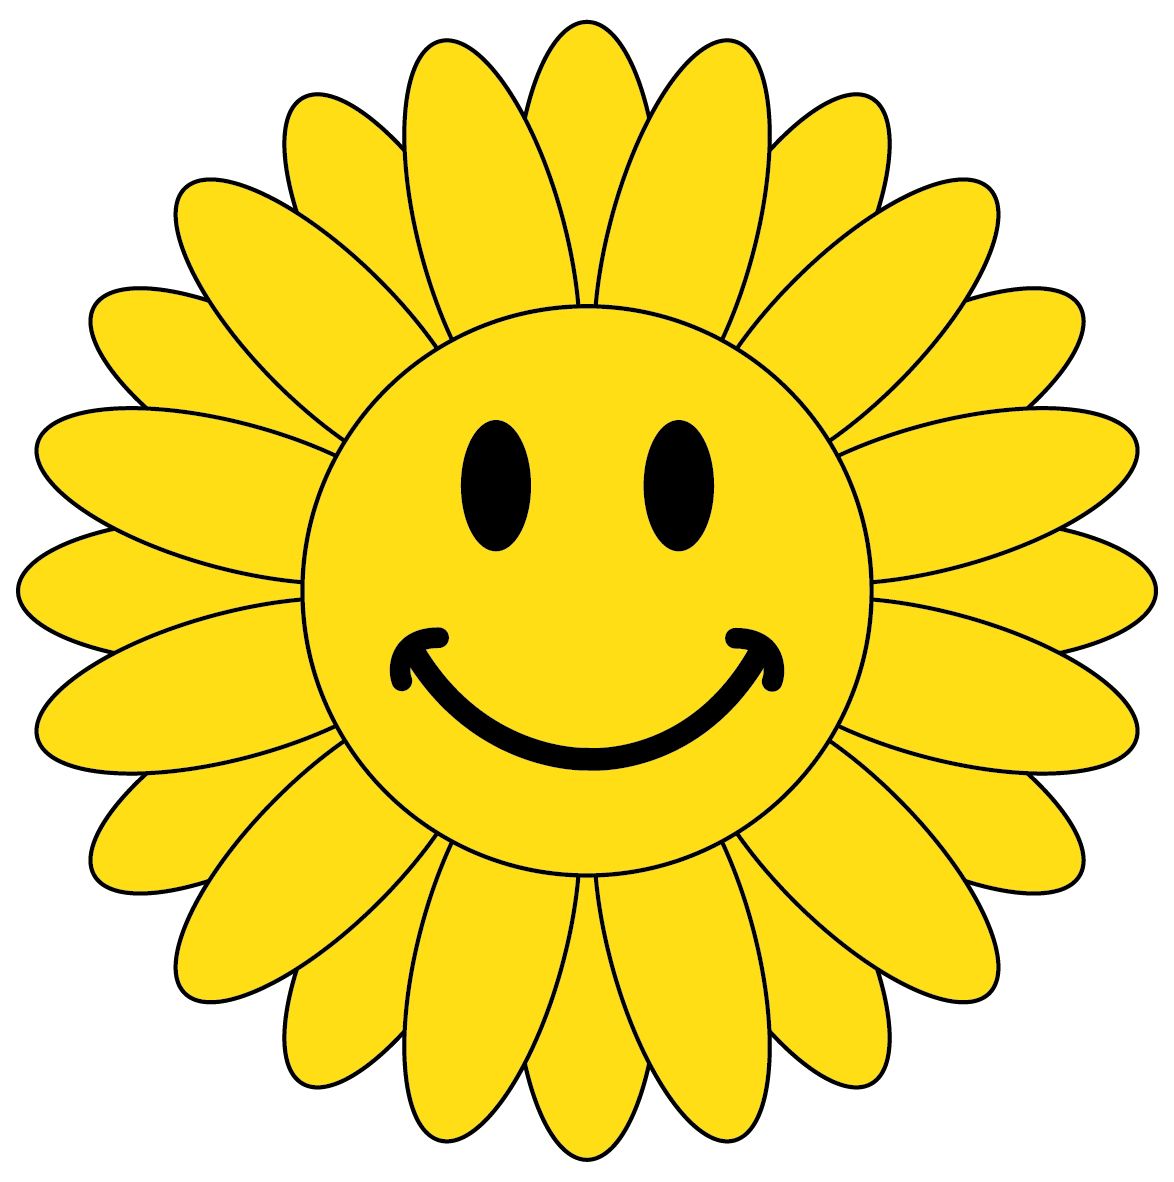 Moving Smiley Faces Clip Art.